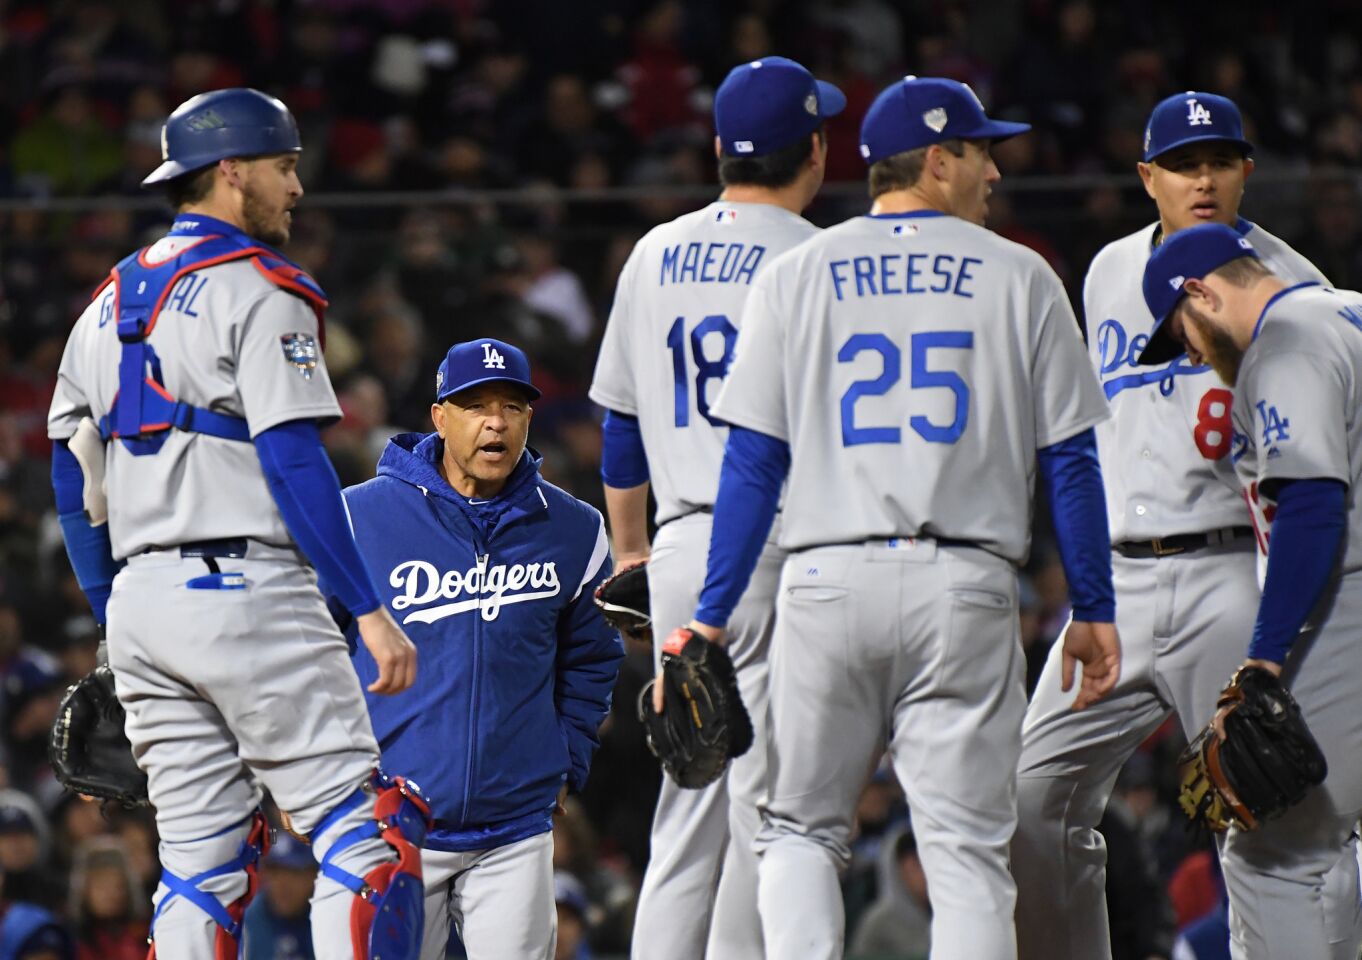 Dodgers manager Dave Roberts takes out relief pitcher Kenta Maeda in the seventh inning.